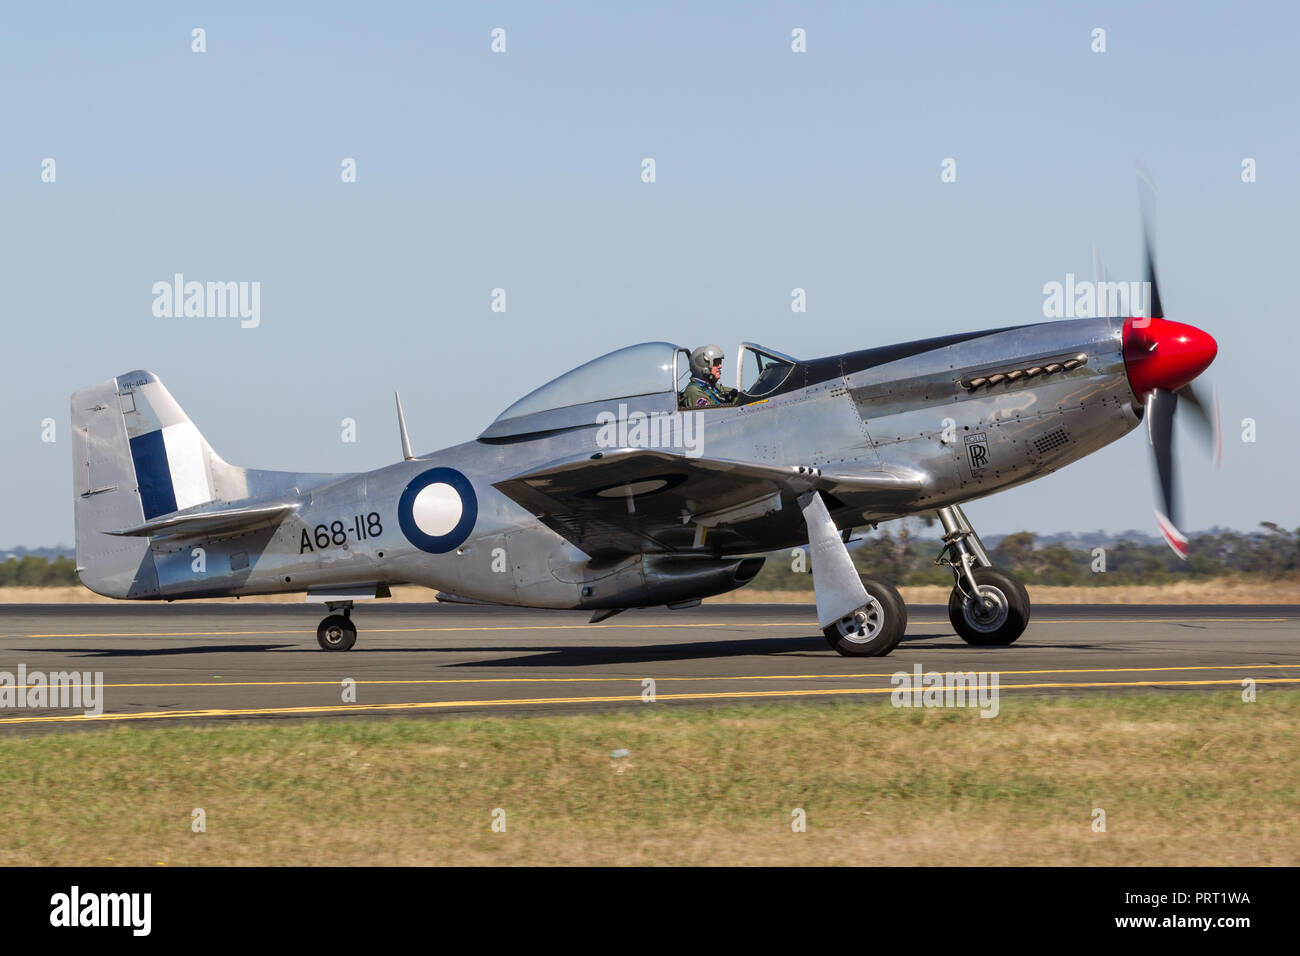 Former Royal Australian Air Force (RAAF) Commonwealth Aircraft Corporation CA-18 Mustang VH-AGJ (North American P-51D Mustang) world war II fighter pl Stock Photo